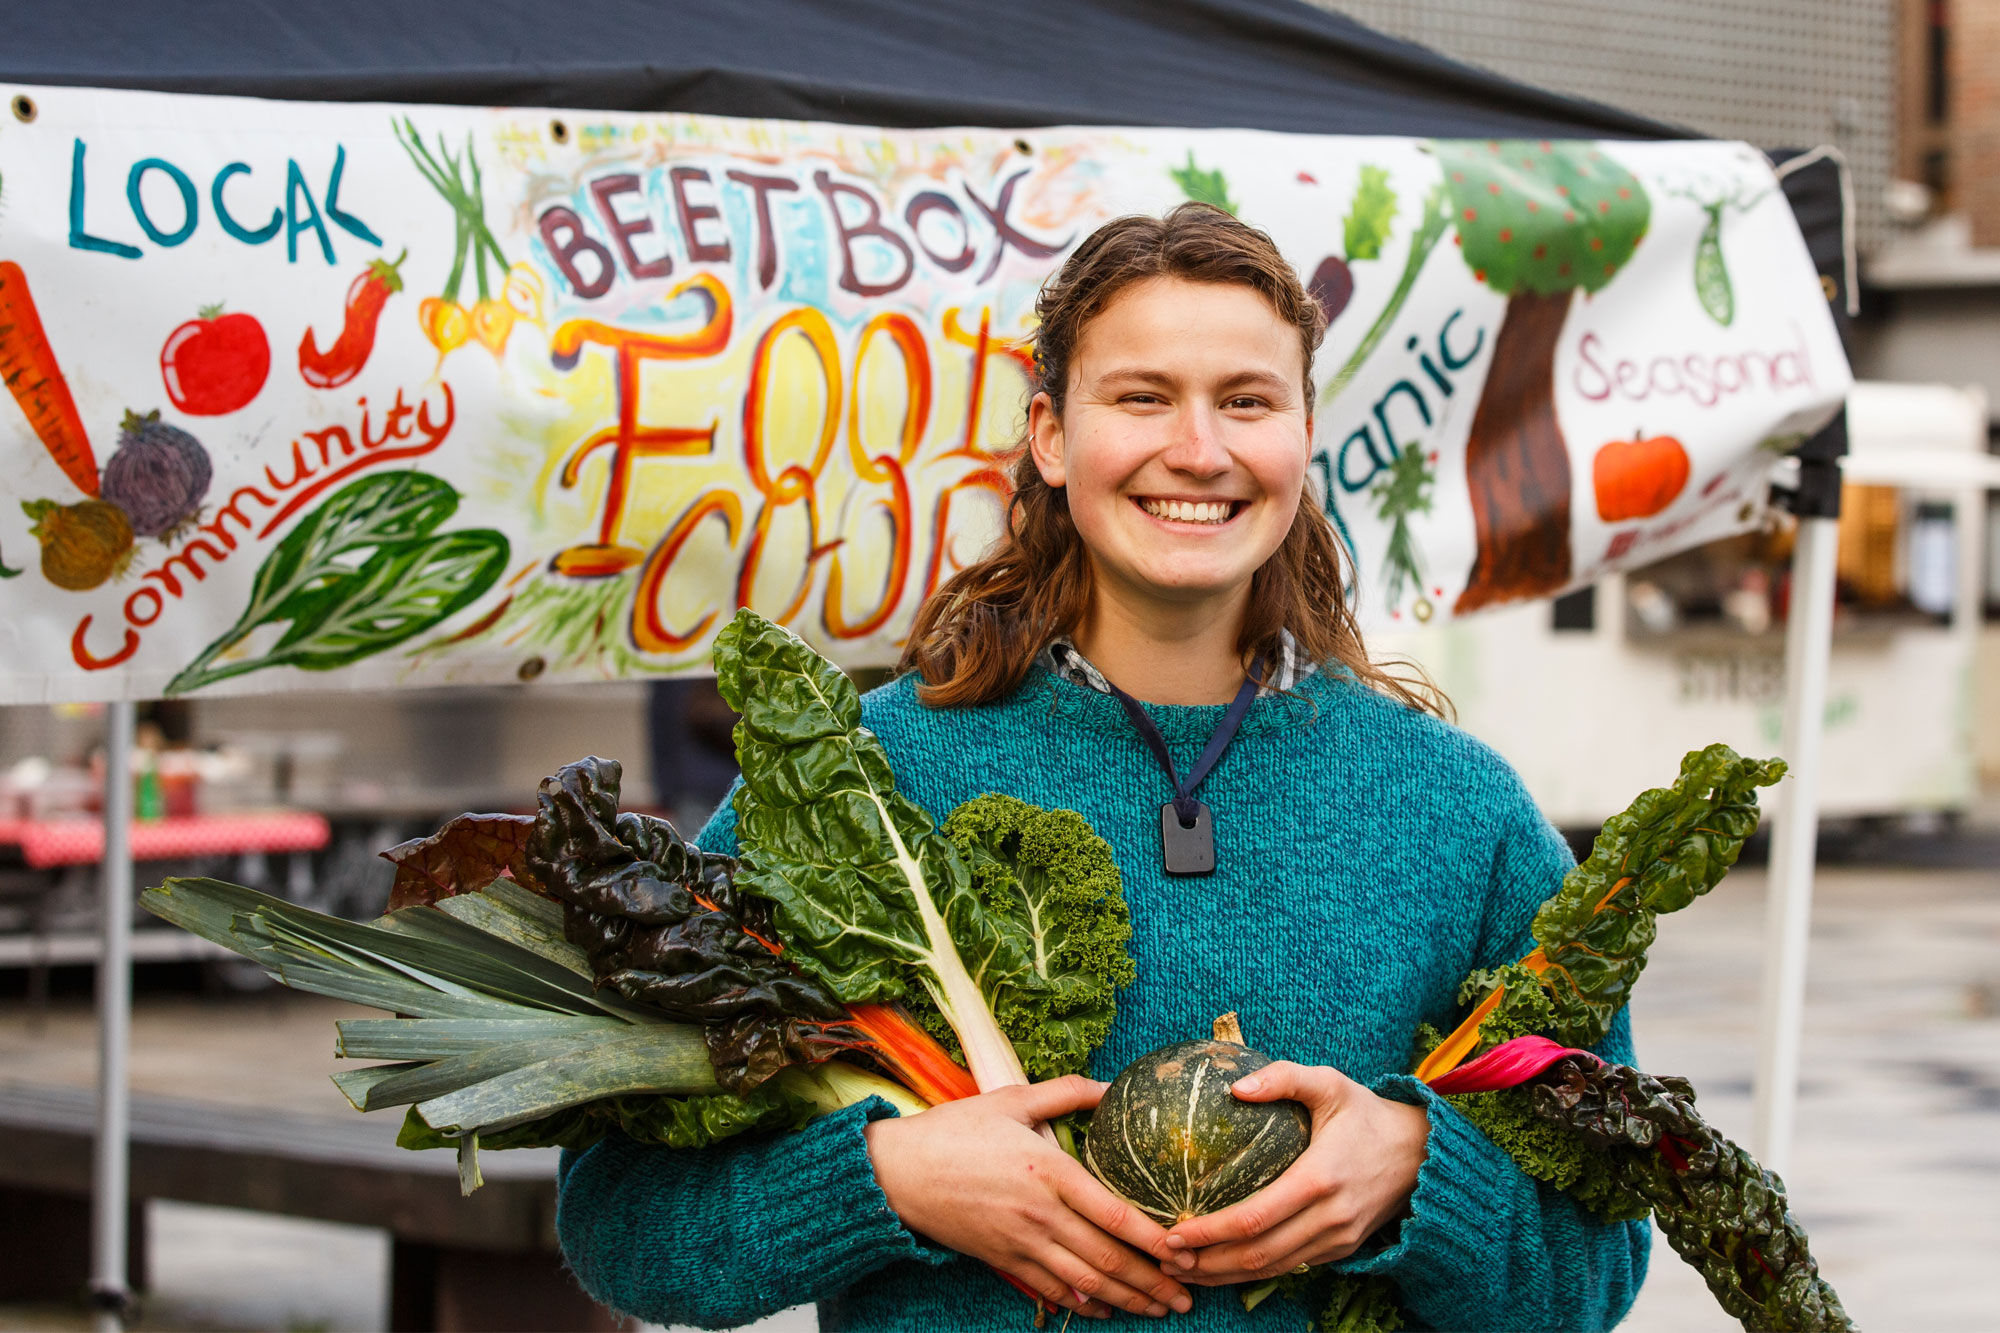 Olivia Haywood-Smith holding fresh vegetables outside her Beetbox stall